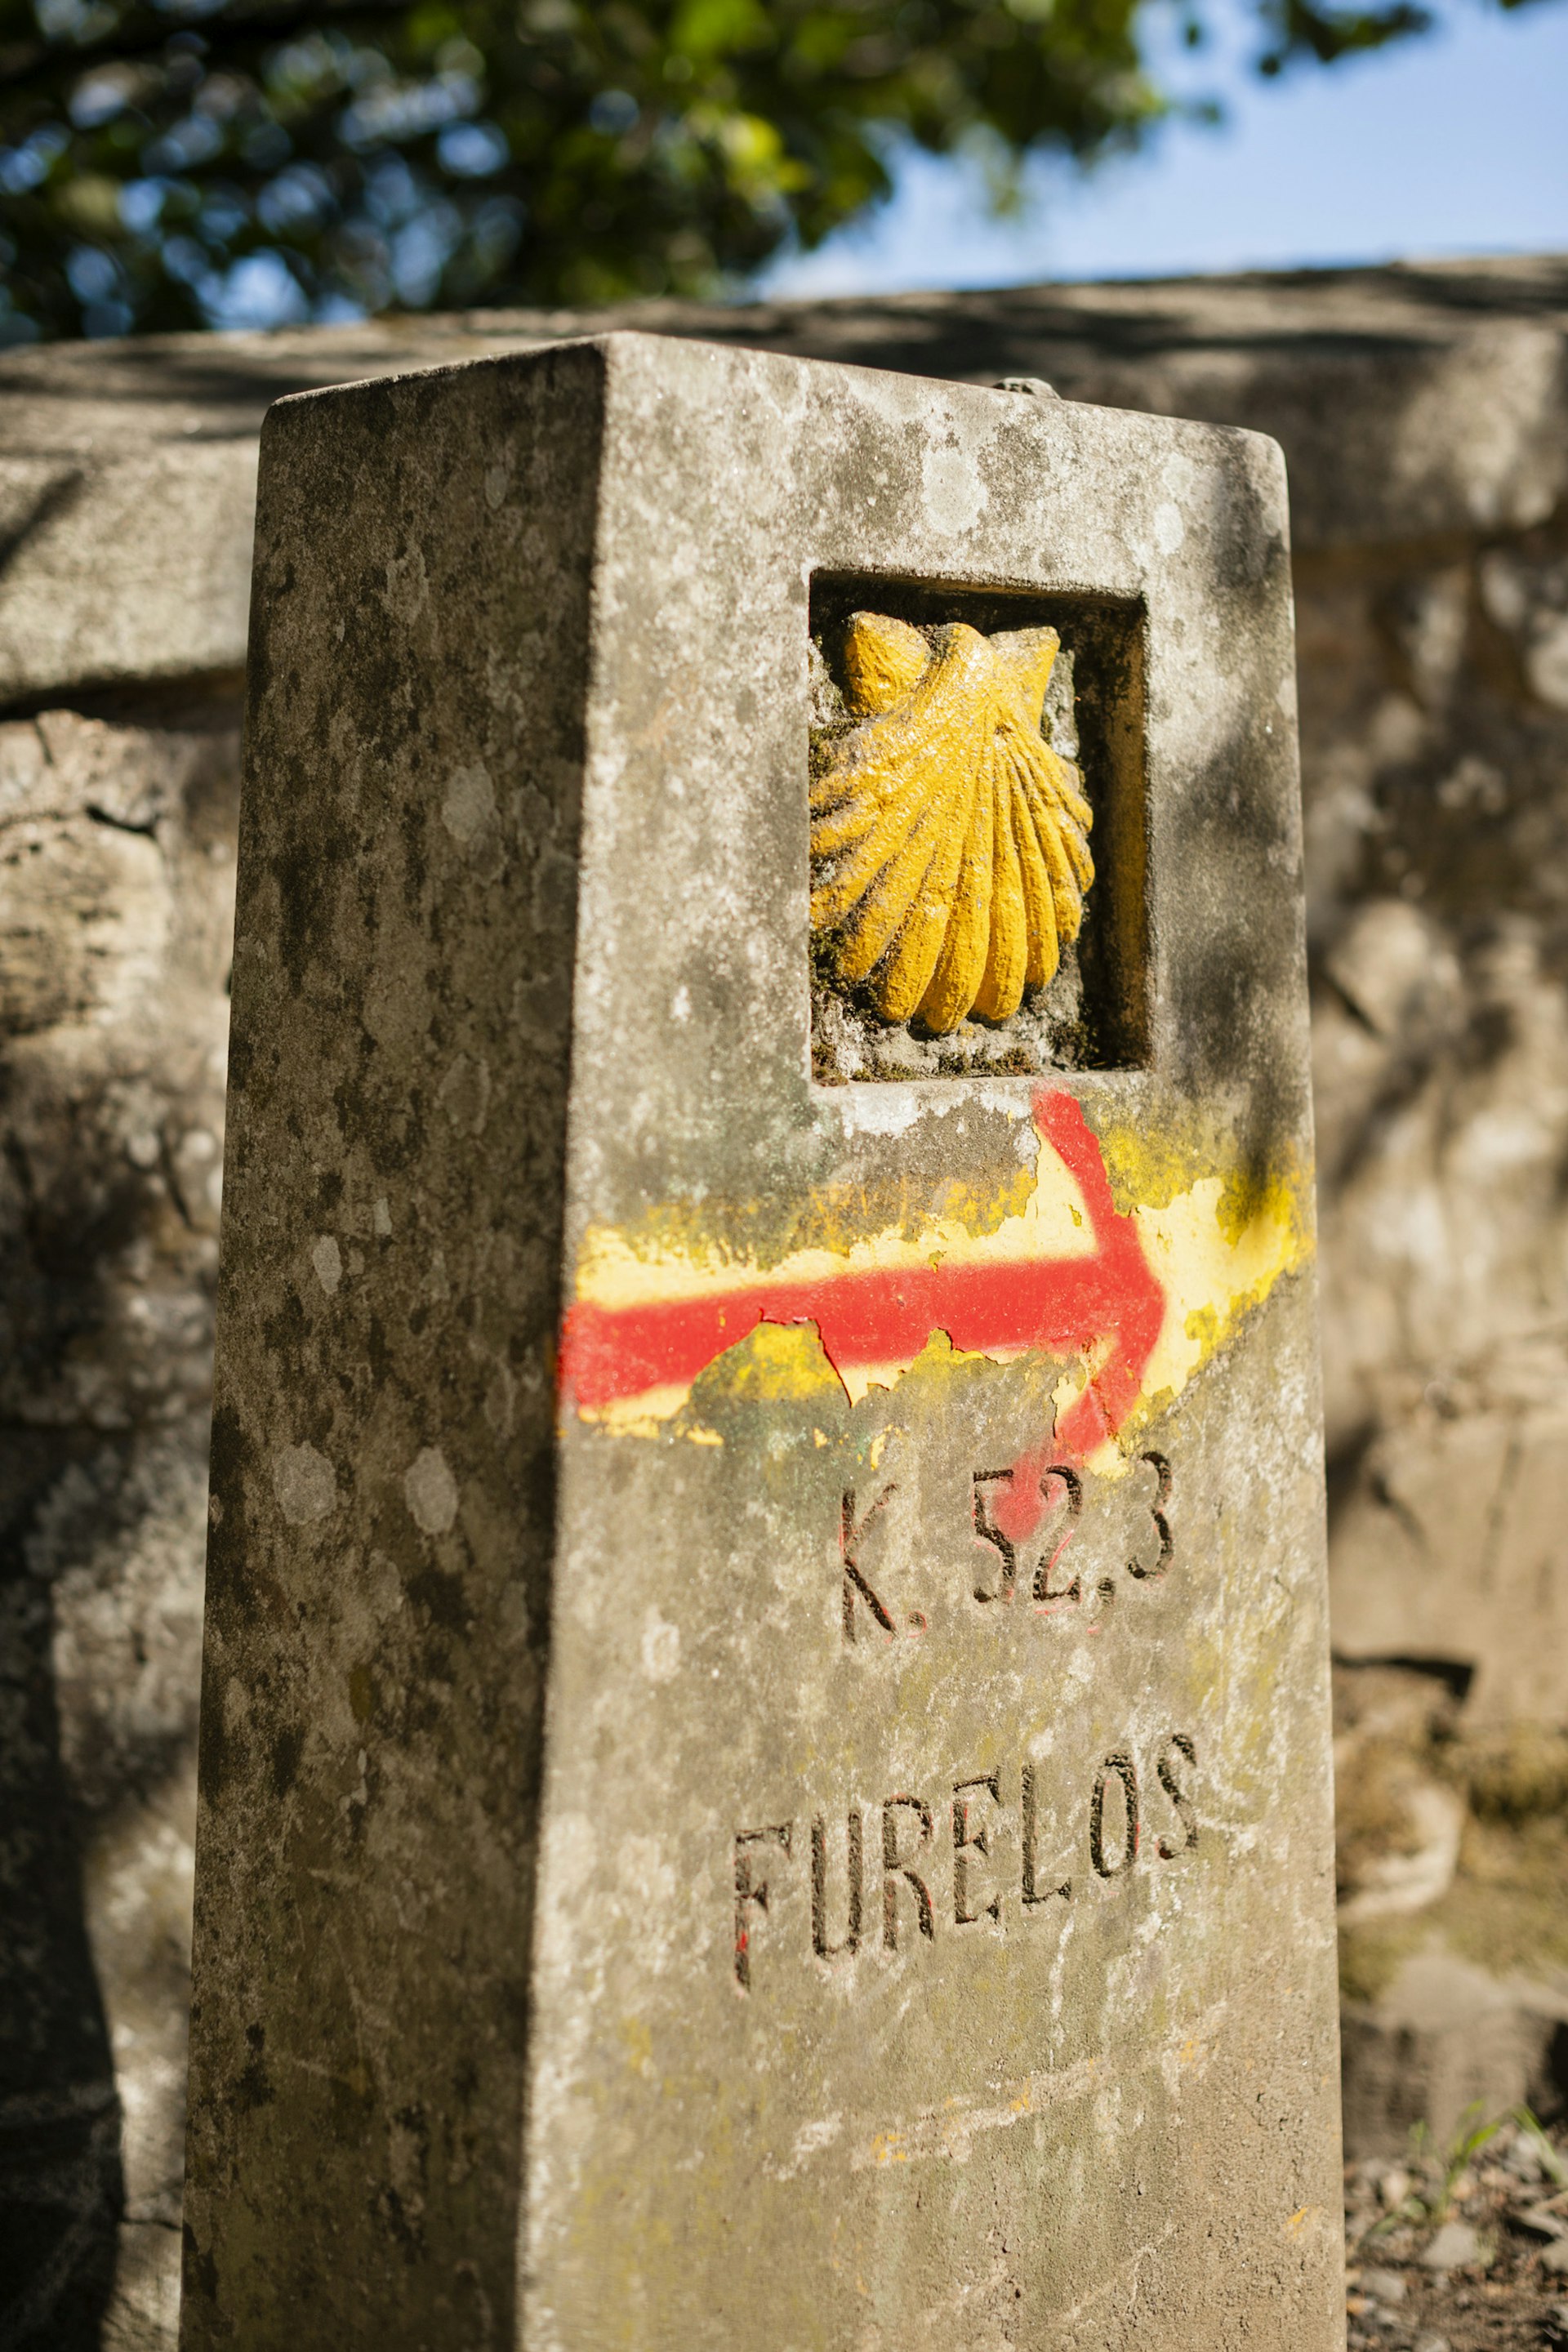 Shot of a golden scallop shell on a small stone pillar. The scallop is the symbol of the Camino